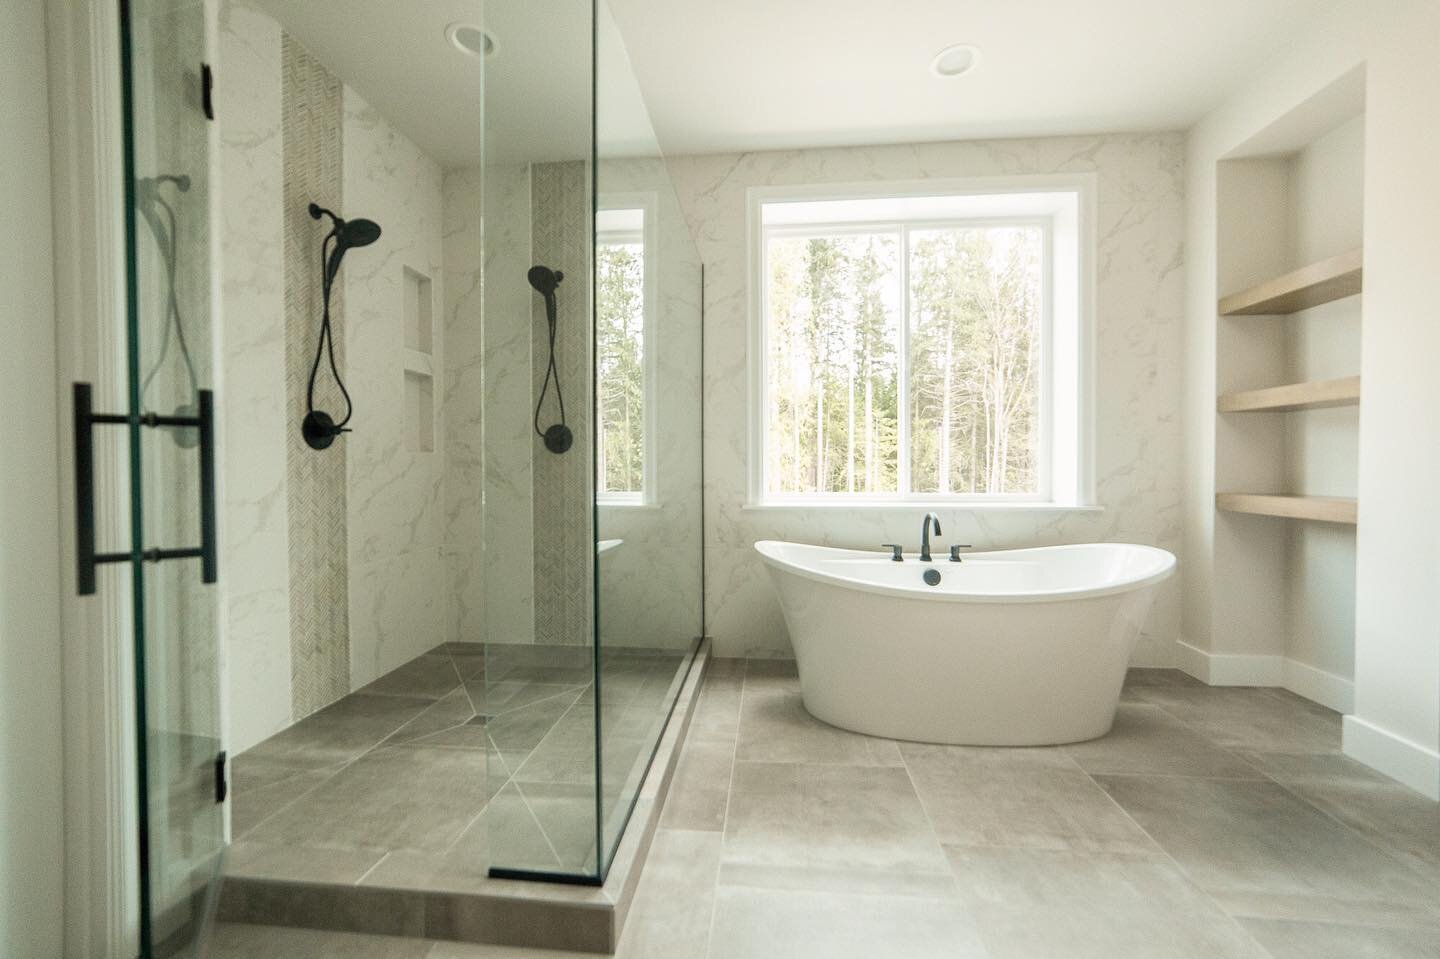 Even with the lights off, this primary bath is flooded with light 🤩 By extending the floor tile into the shower, it allows this room to appear even bigger than it already is. Beautiful!
Floor: @arizonatile Reside Ash Matte
Walls: @arizonatile Themar